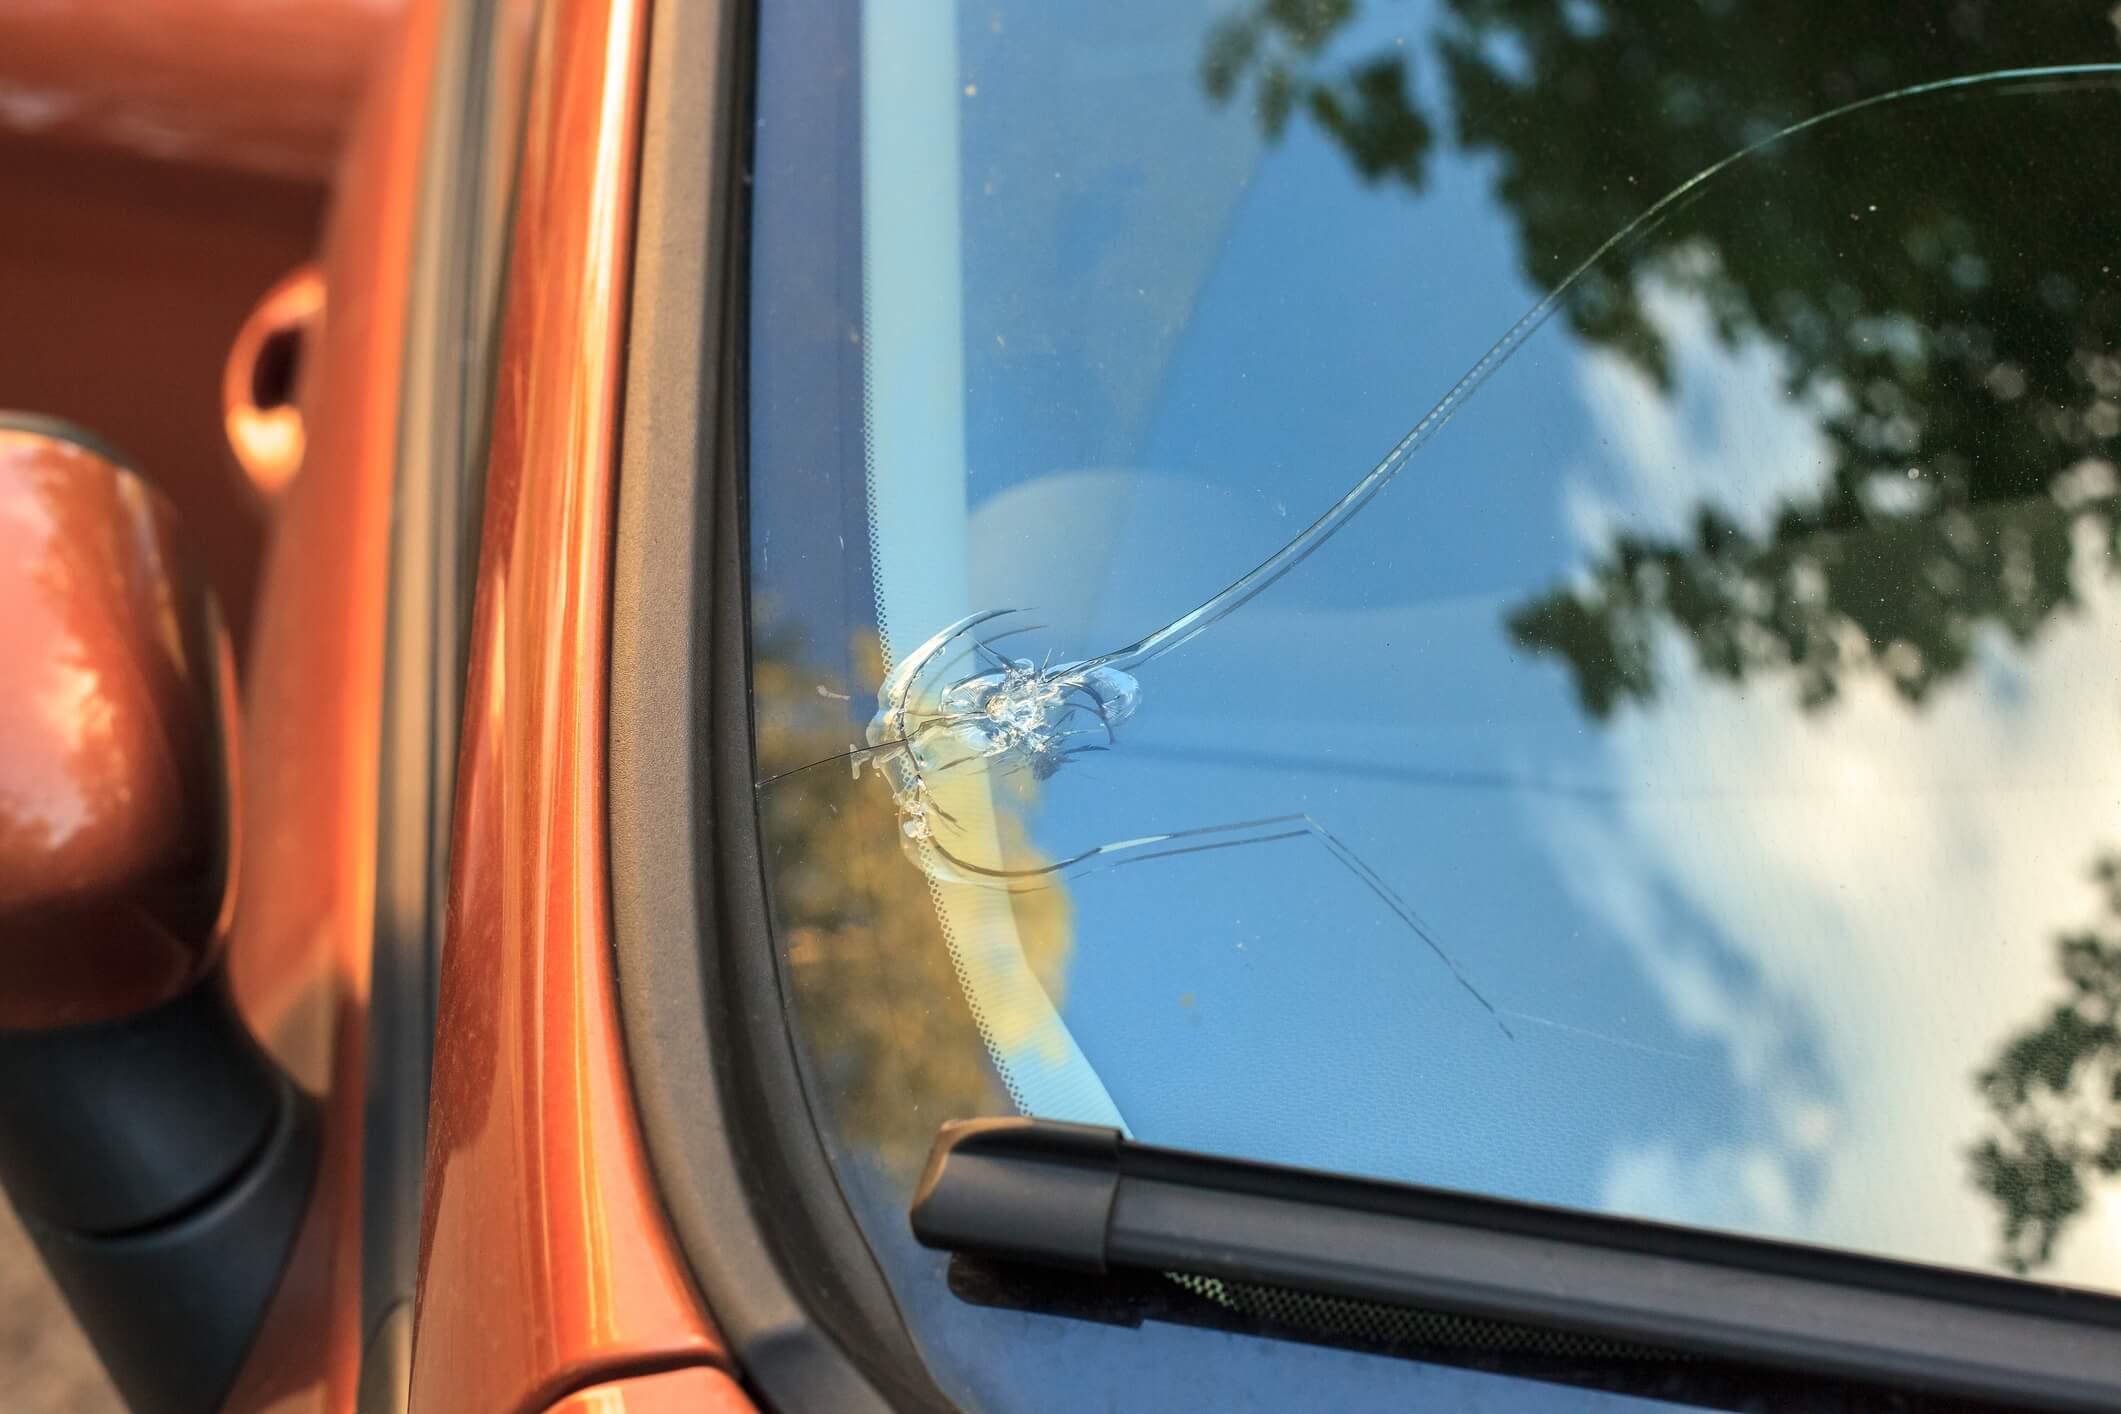 Can An Auto Glass Repair Shop Fix Scratched Windshield Glass